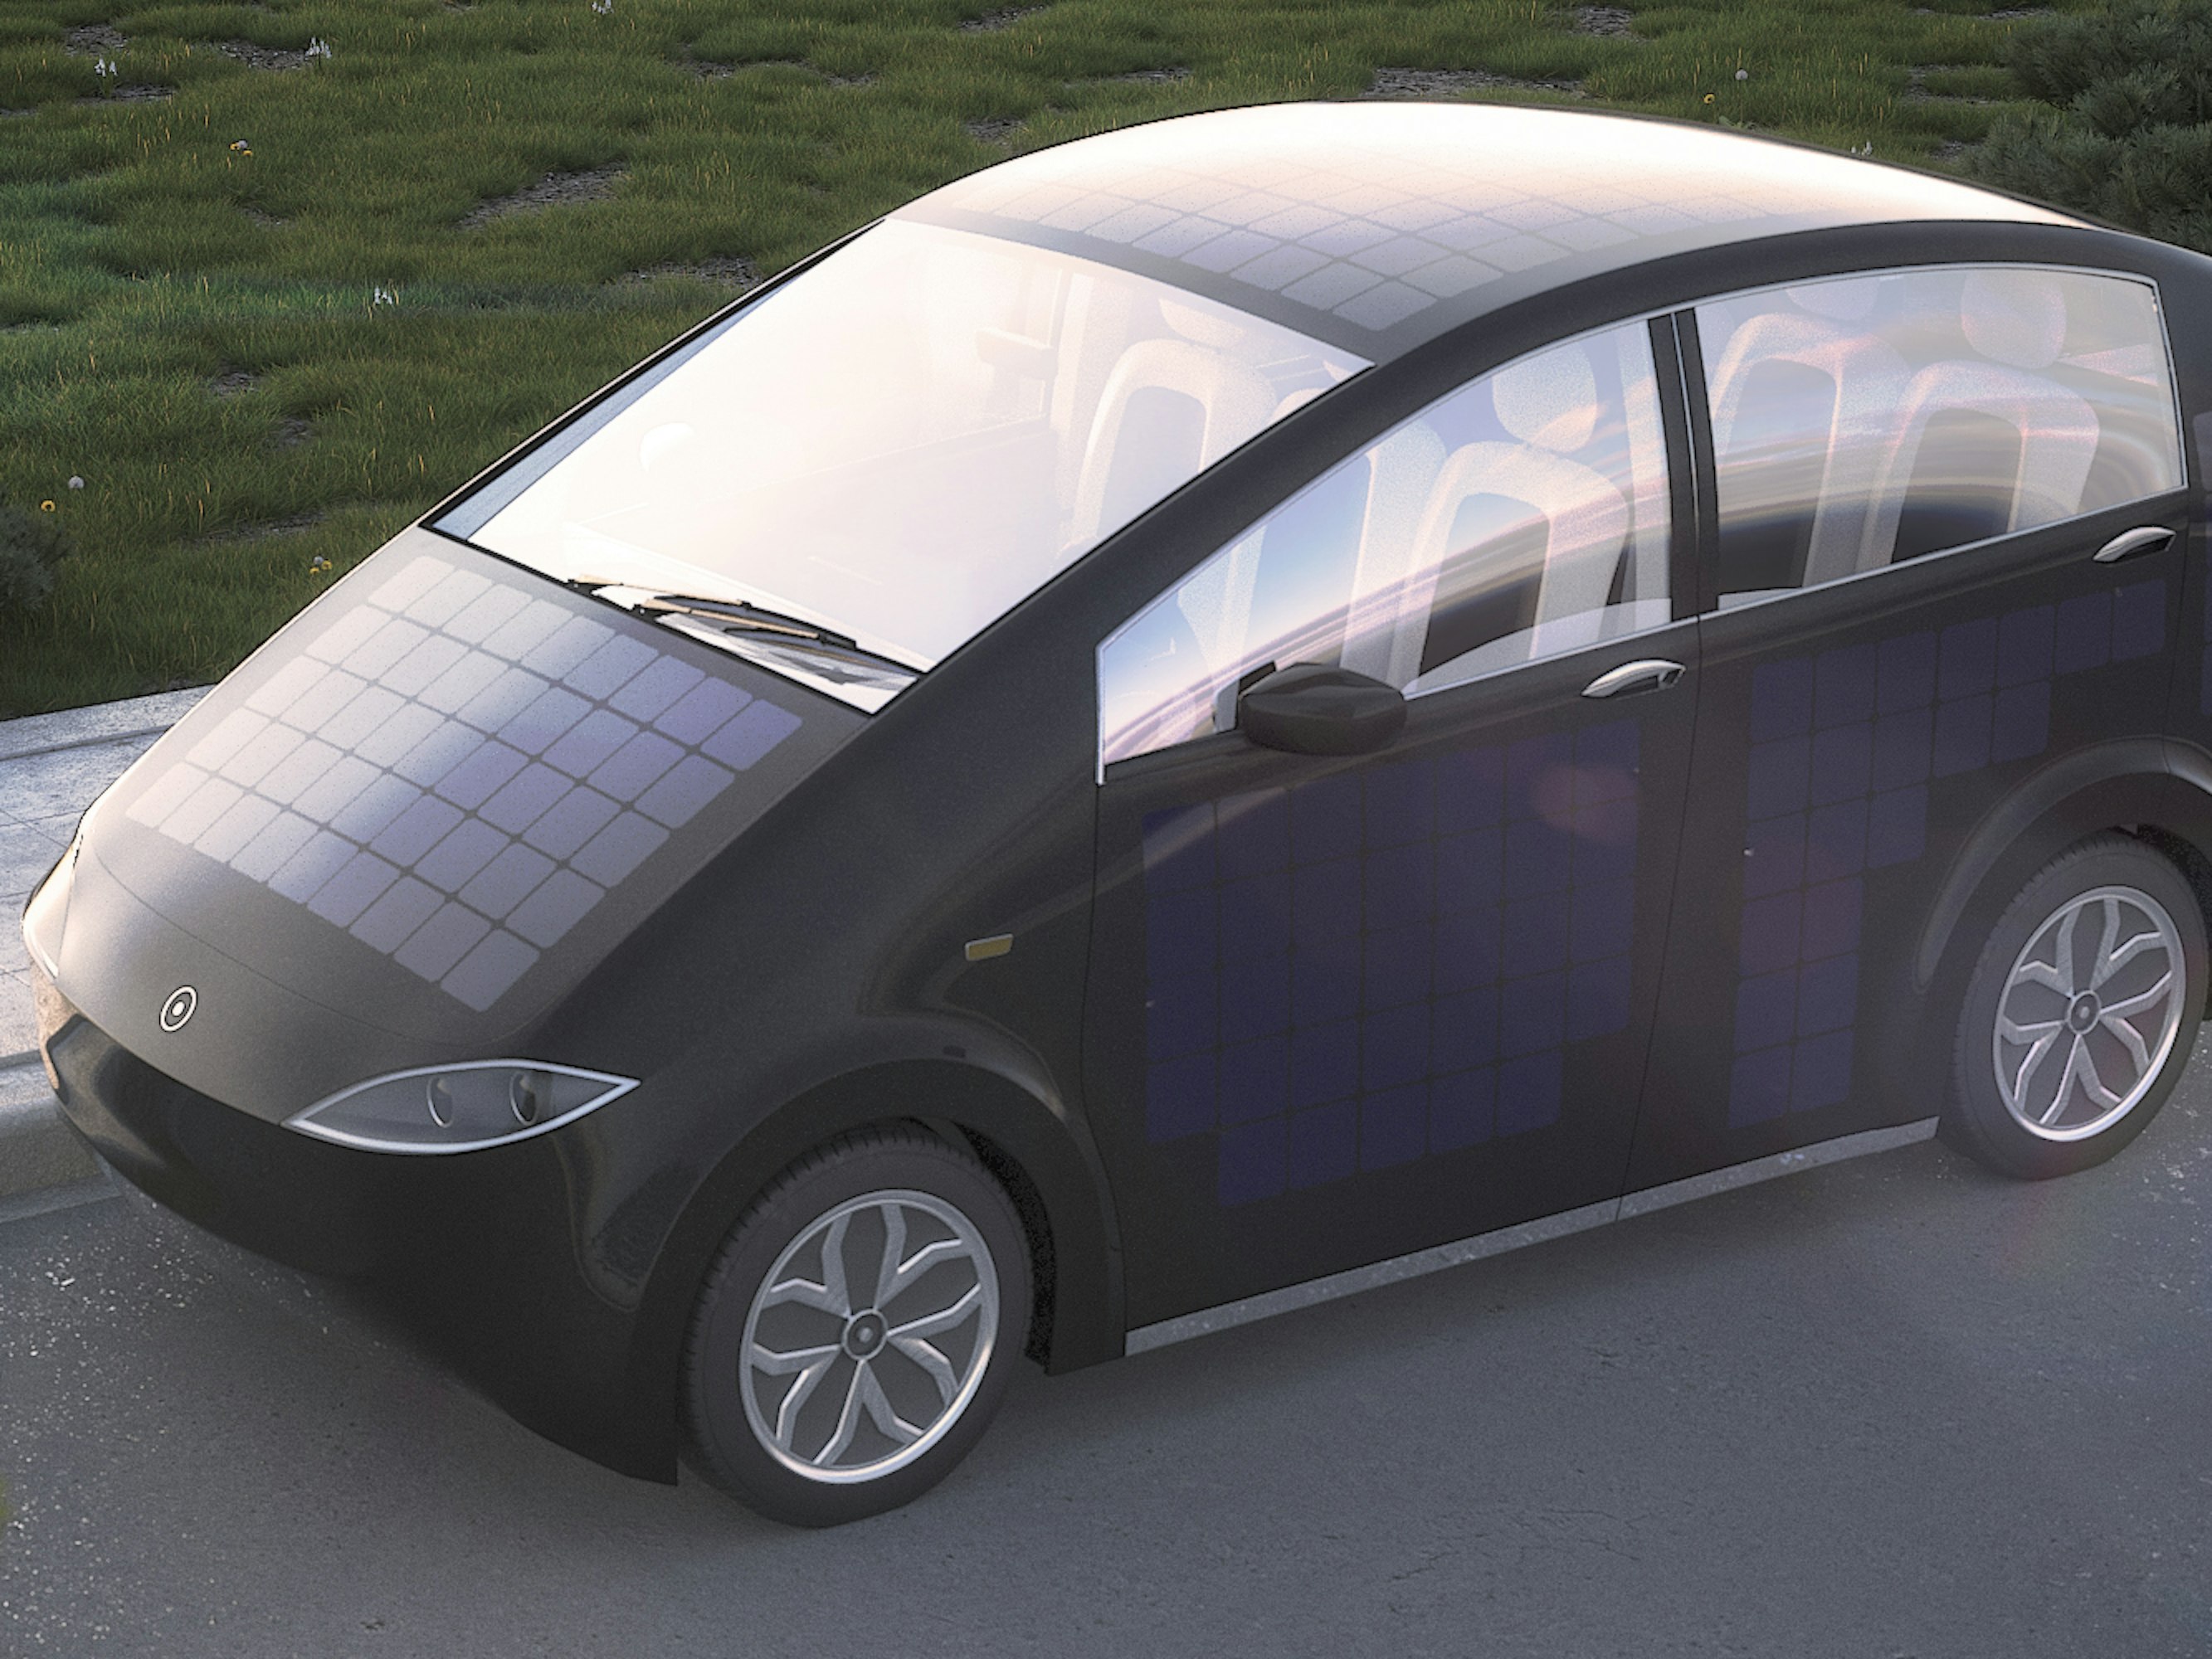 Solar Panels Are Moving from Rooftops to Cars | Inverse